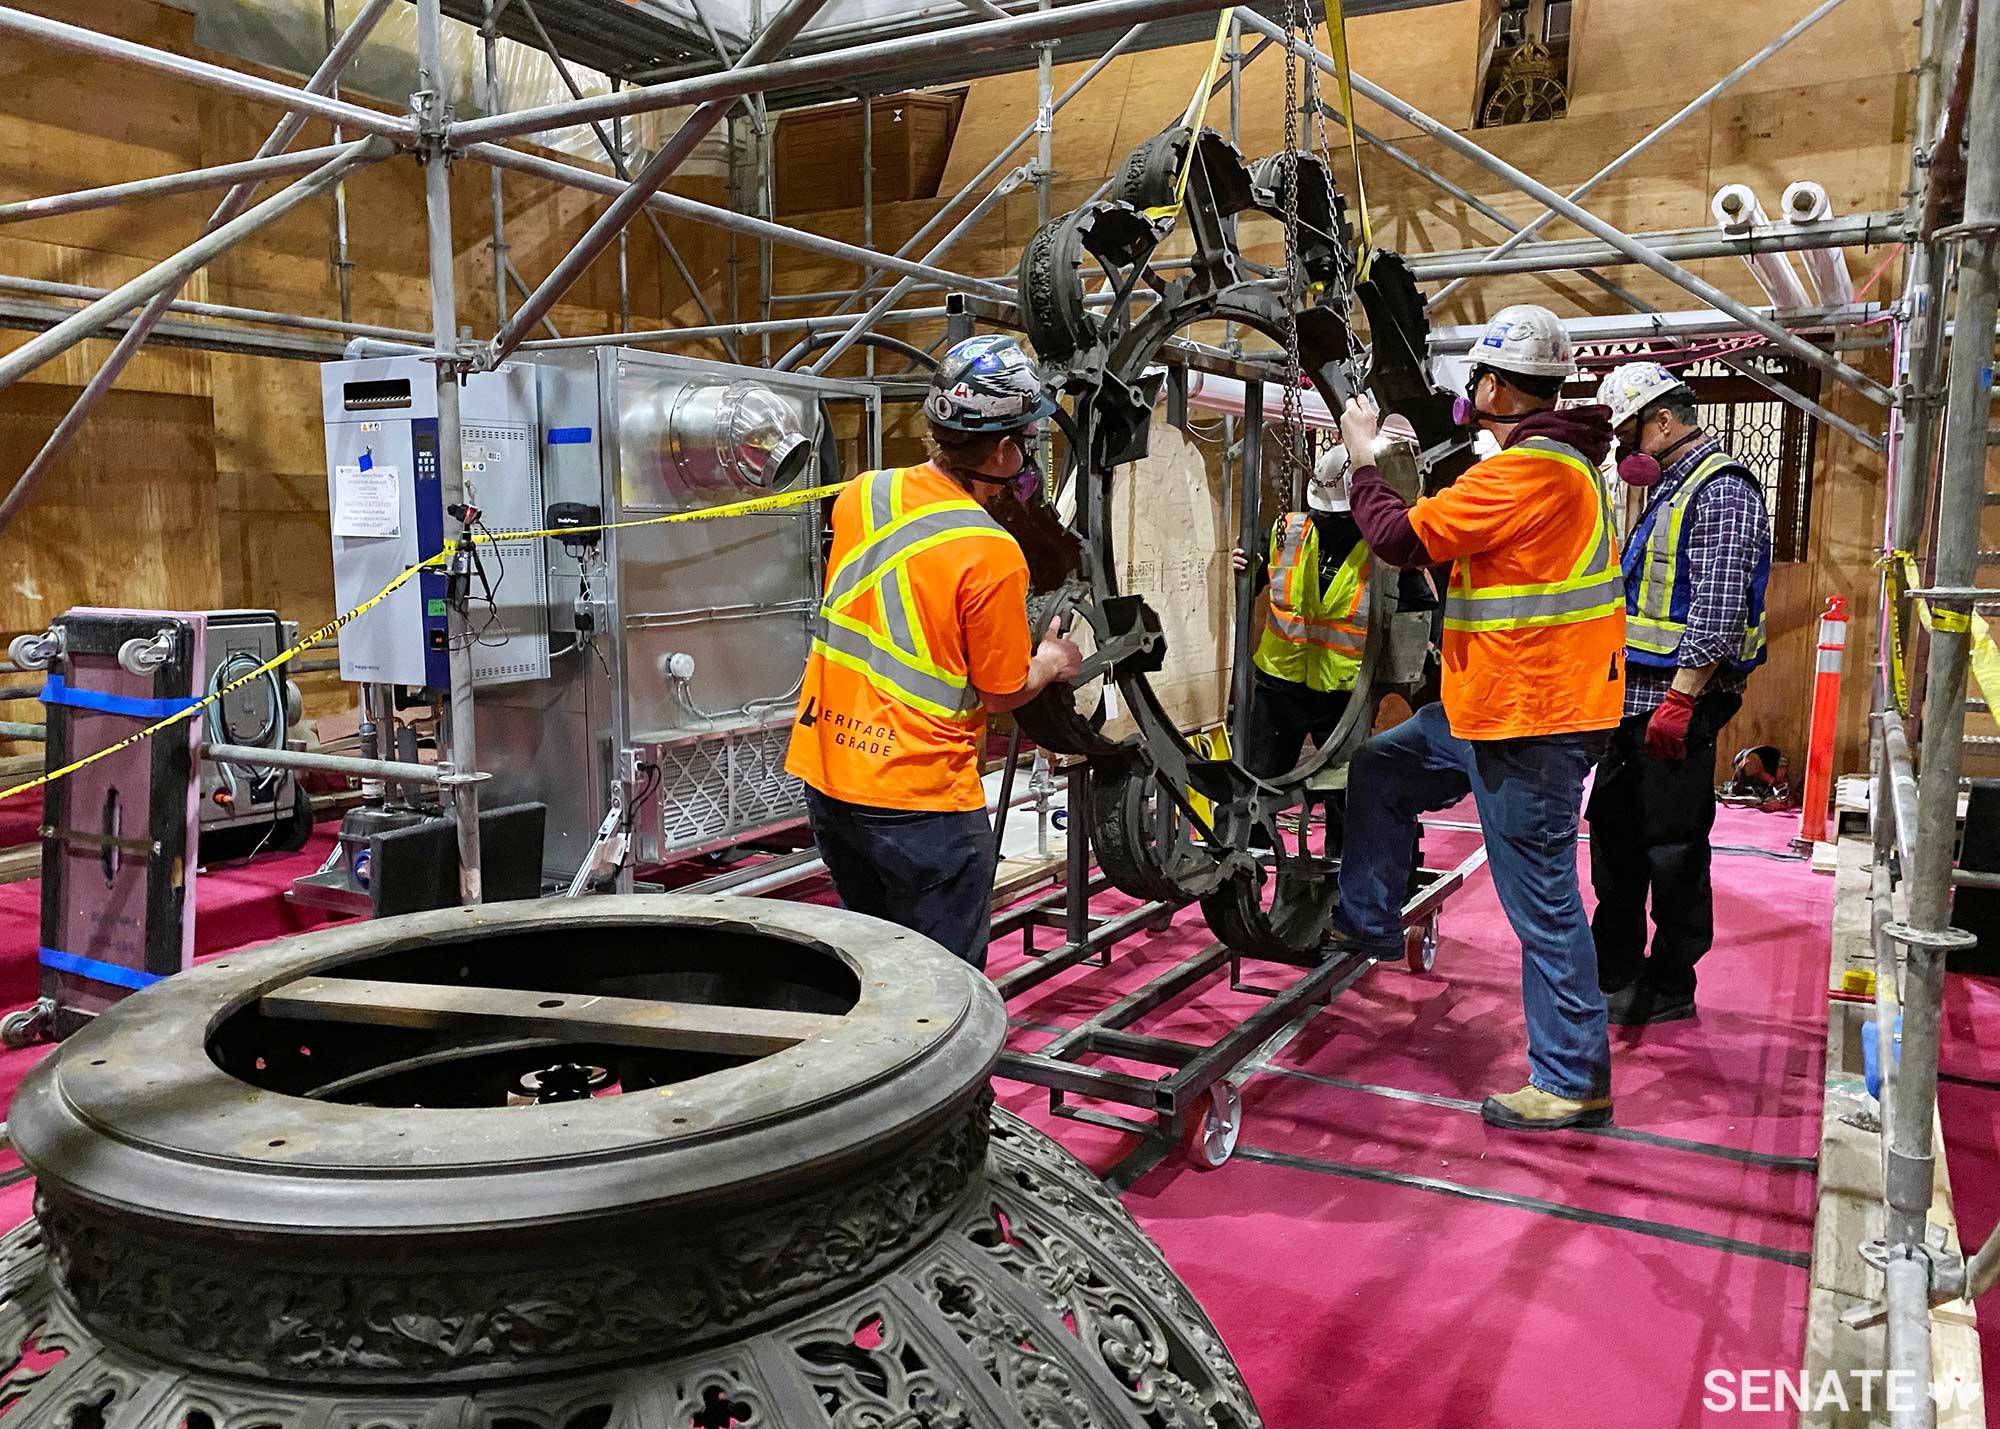 With the chandelier resting on a dolly, workers secure the giant ring to a custom-built frame on wheels. The ring, about 2.75 metres in diameter, was cast in one piece when it was forged — a feat “almost unheard of” for a lighting fixture, Mr. Nelson said. “That was one heck of a foundry at the Robert Mitchell Company, I can tell you.”